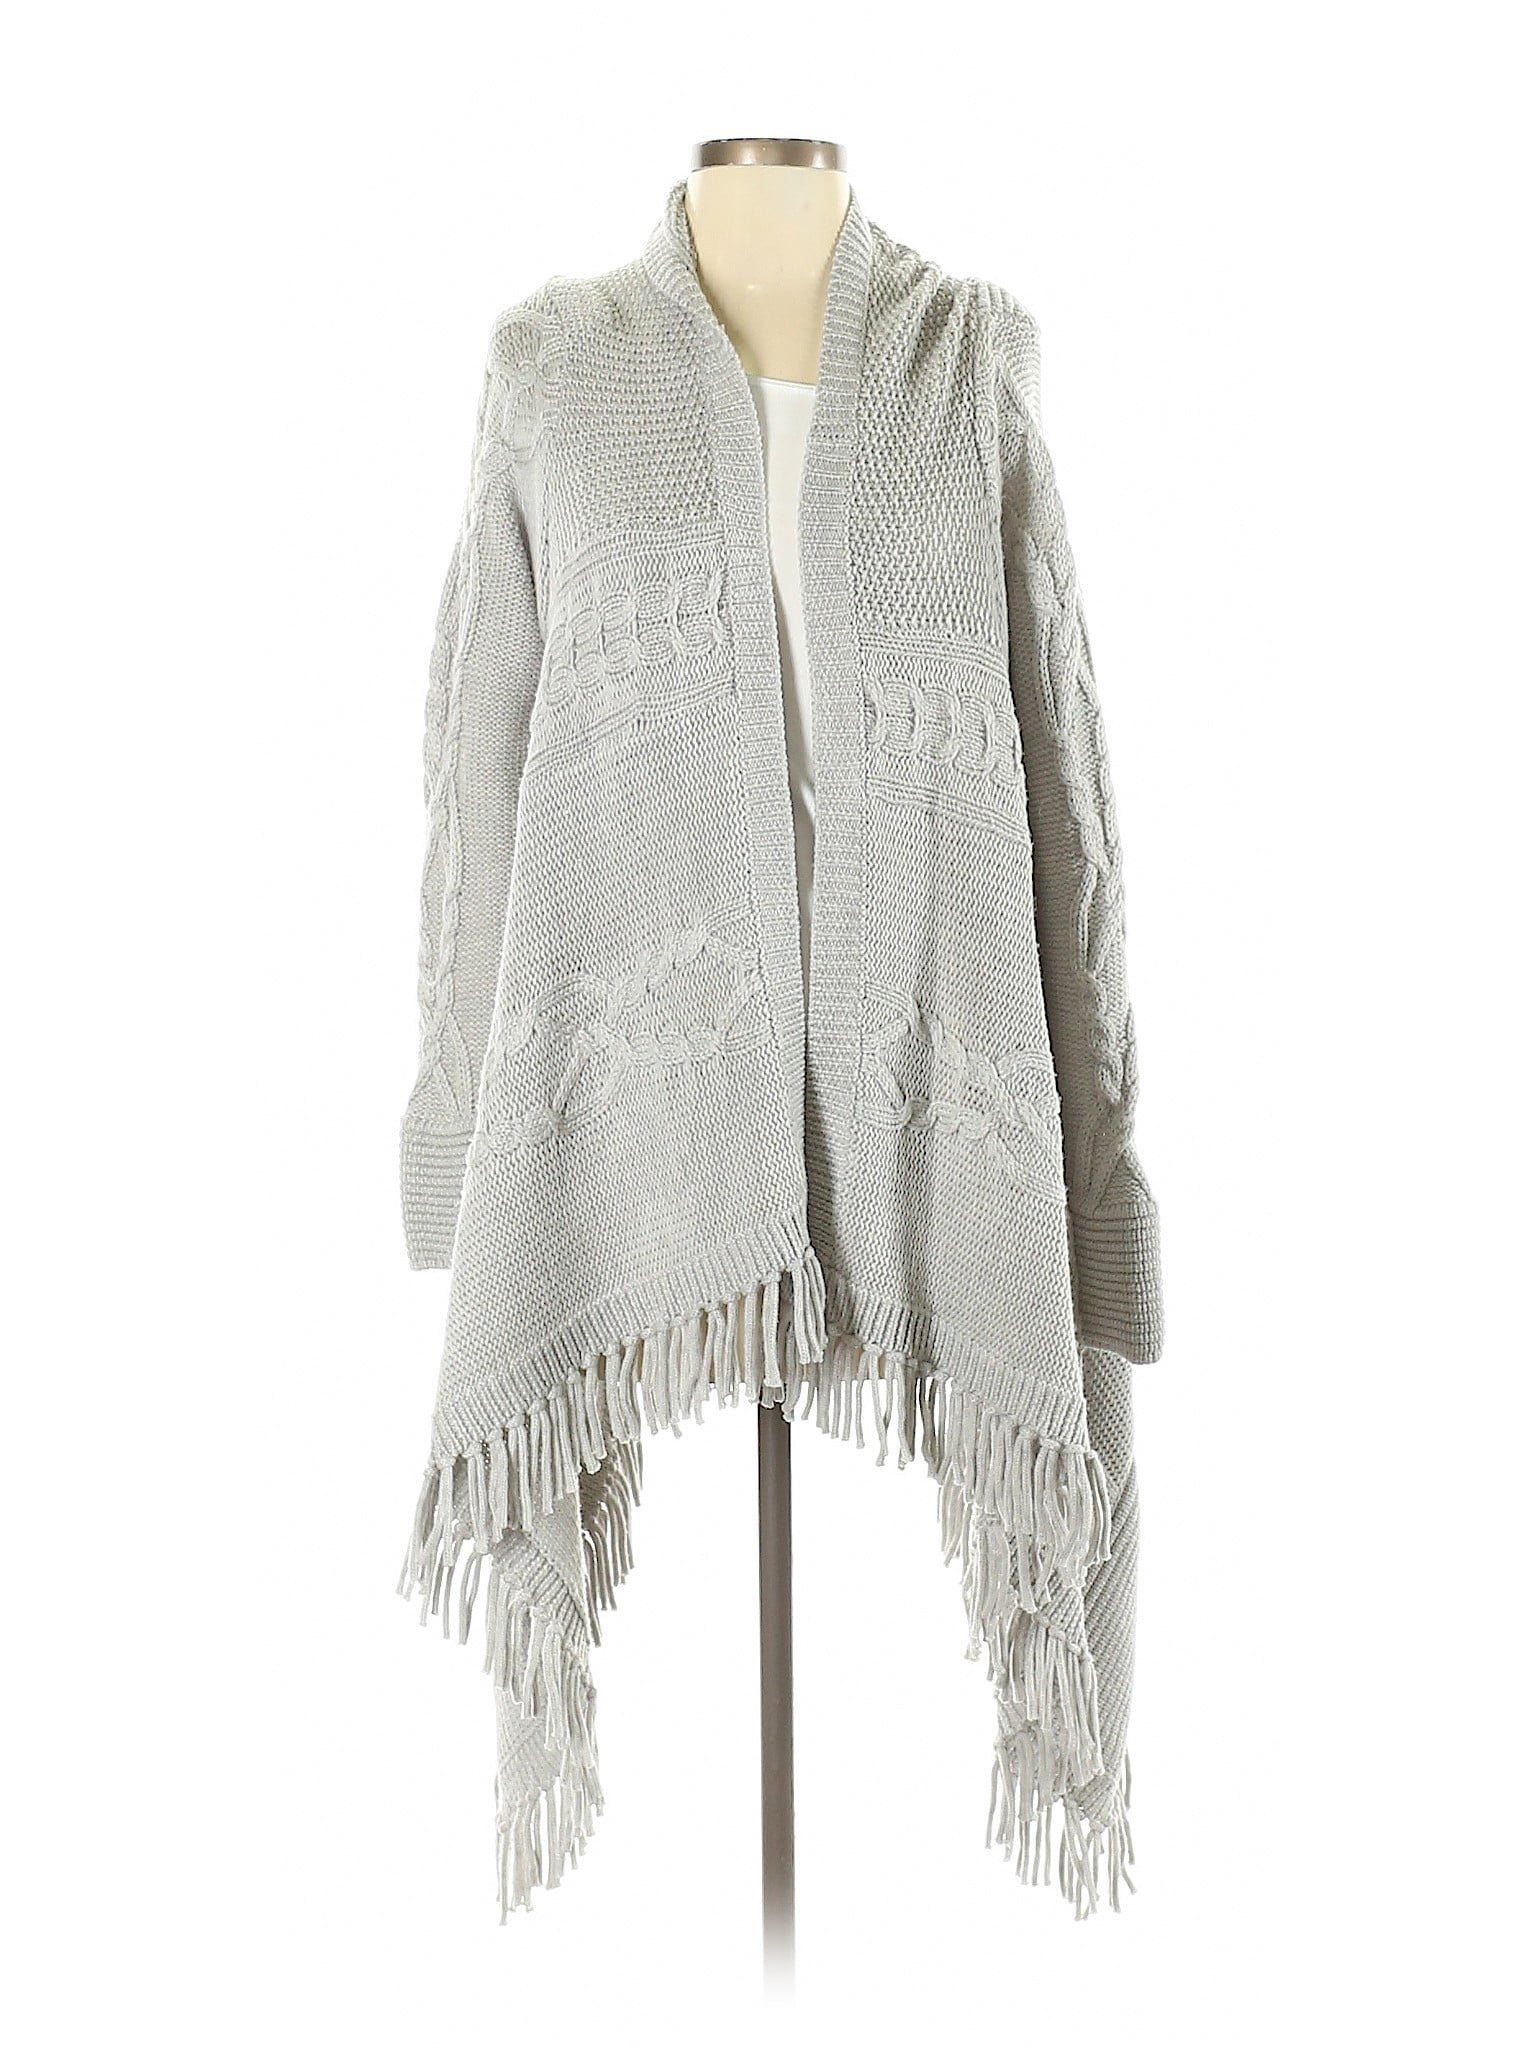 W by Worth - Pre-Owned W by Worth Women's Size P Petite Wool Cardigan ...